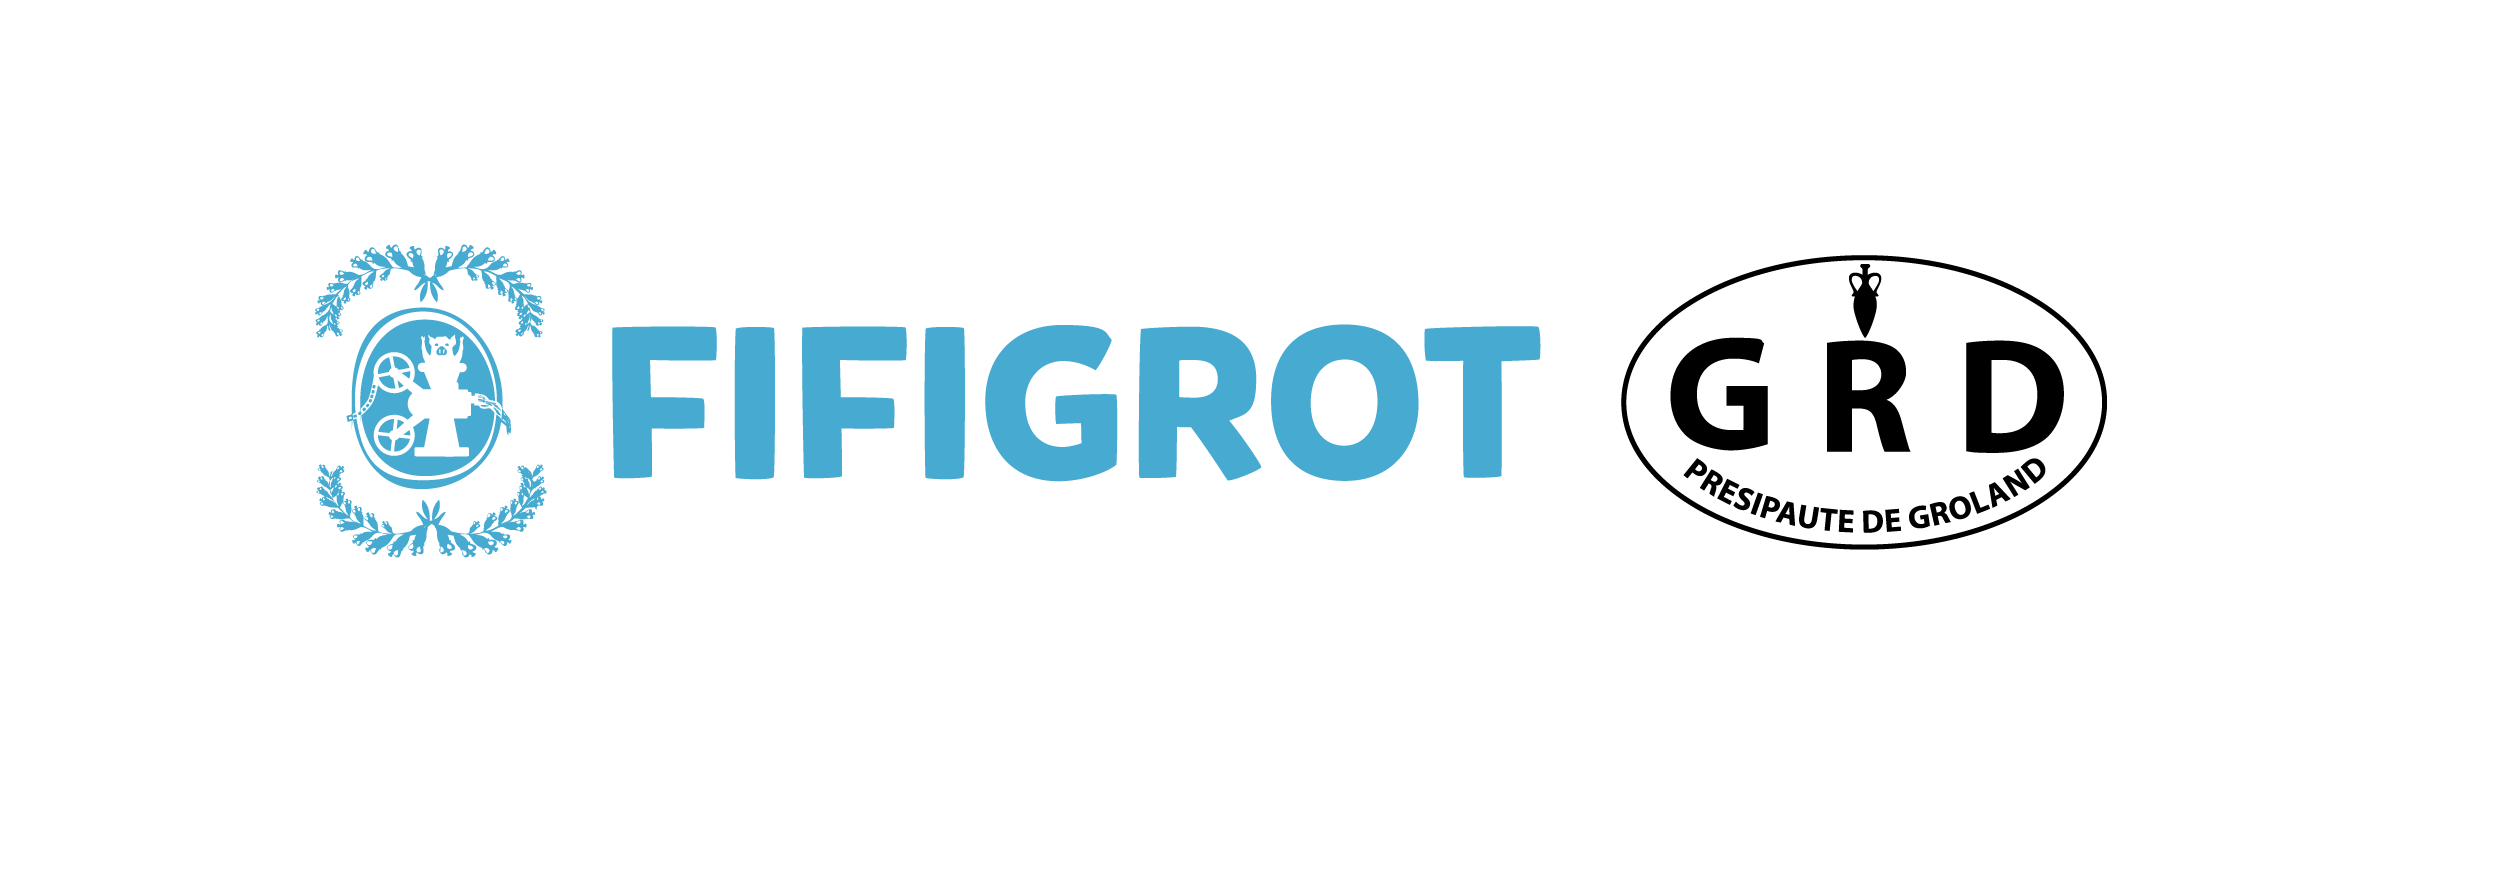 Boutique Fifigrot